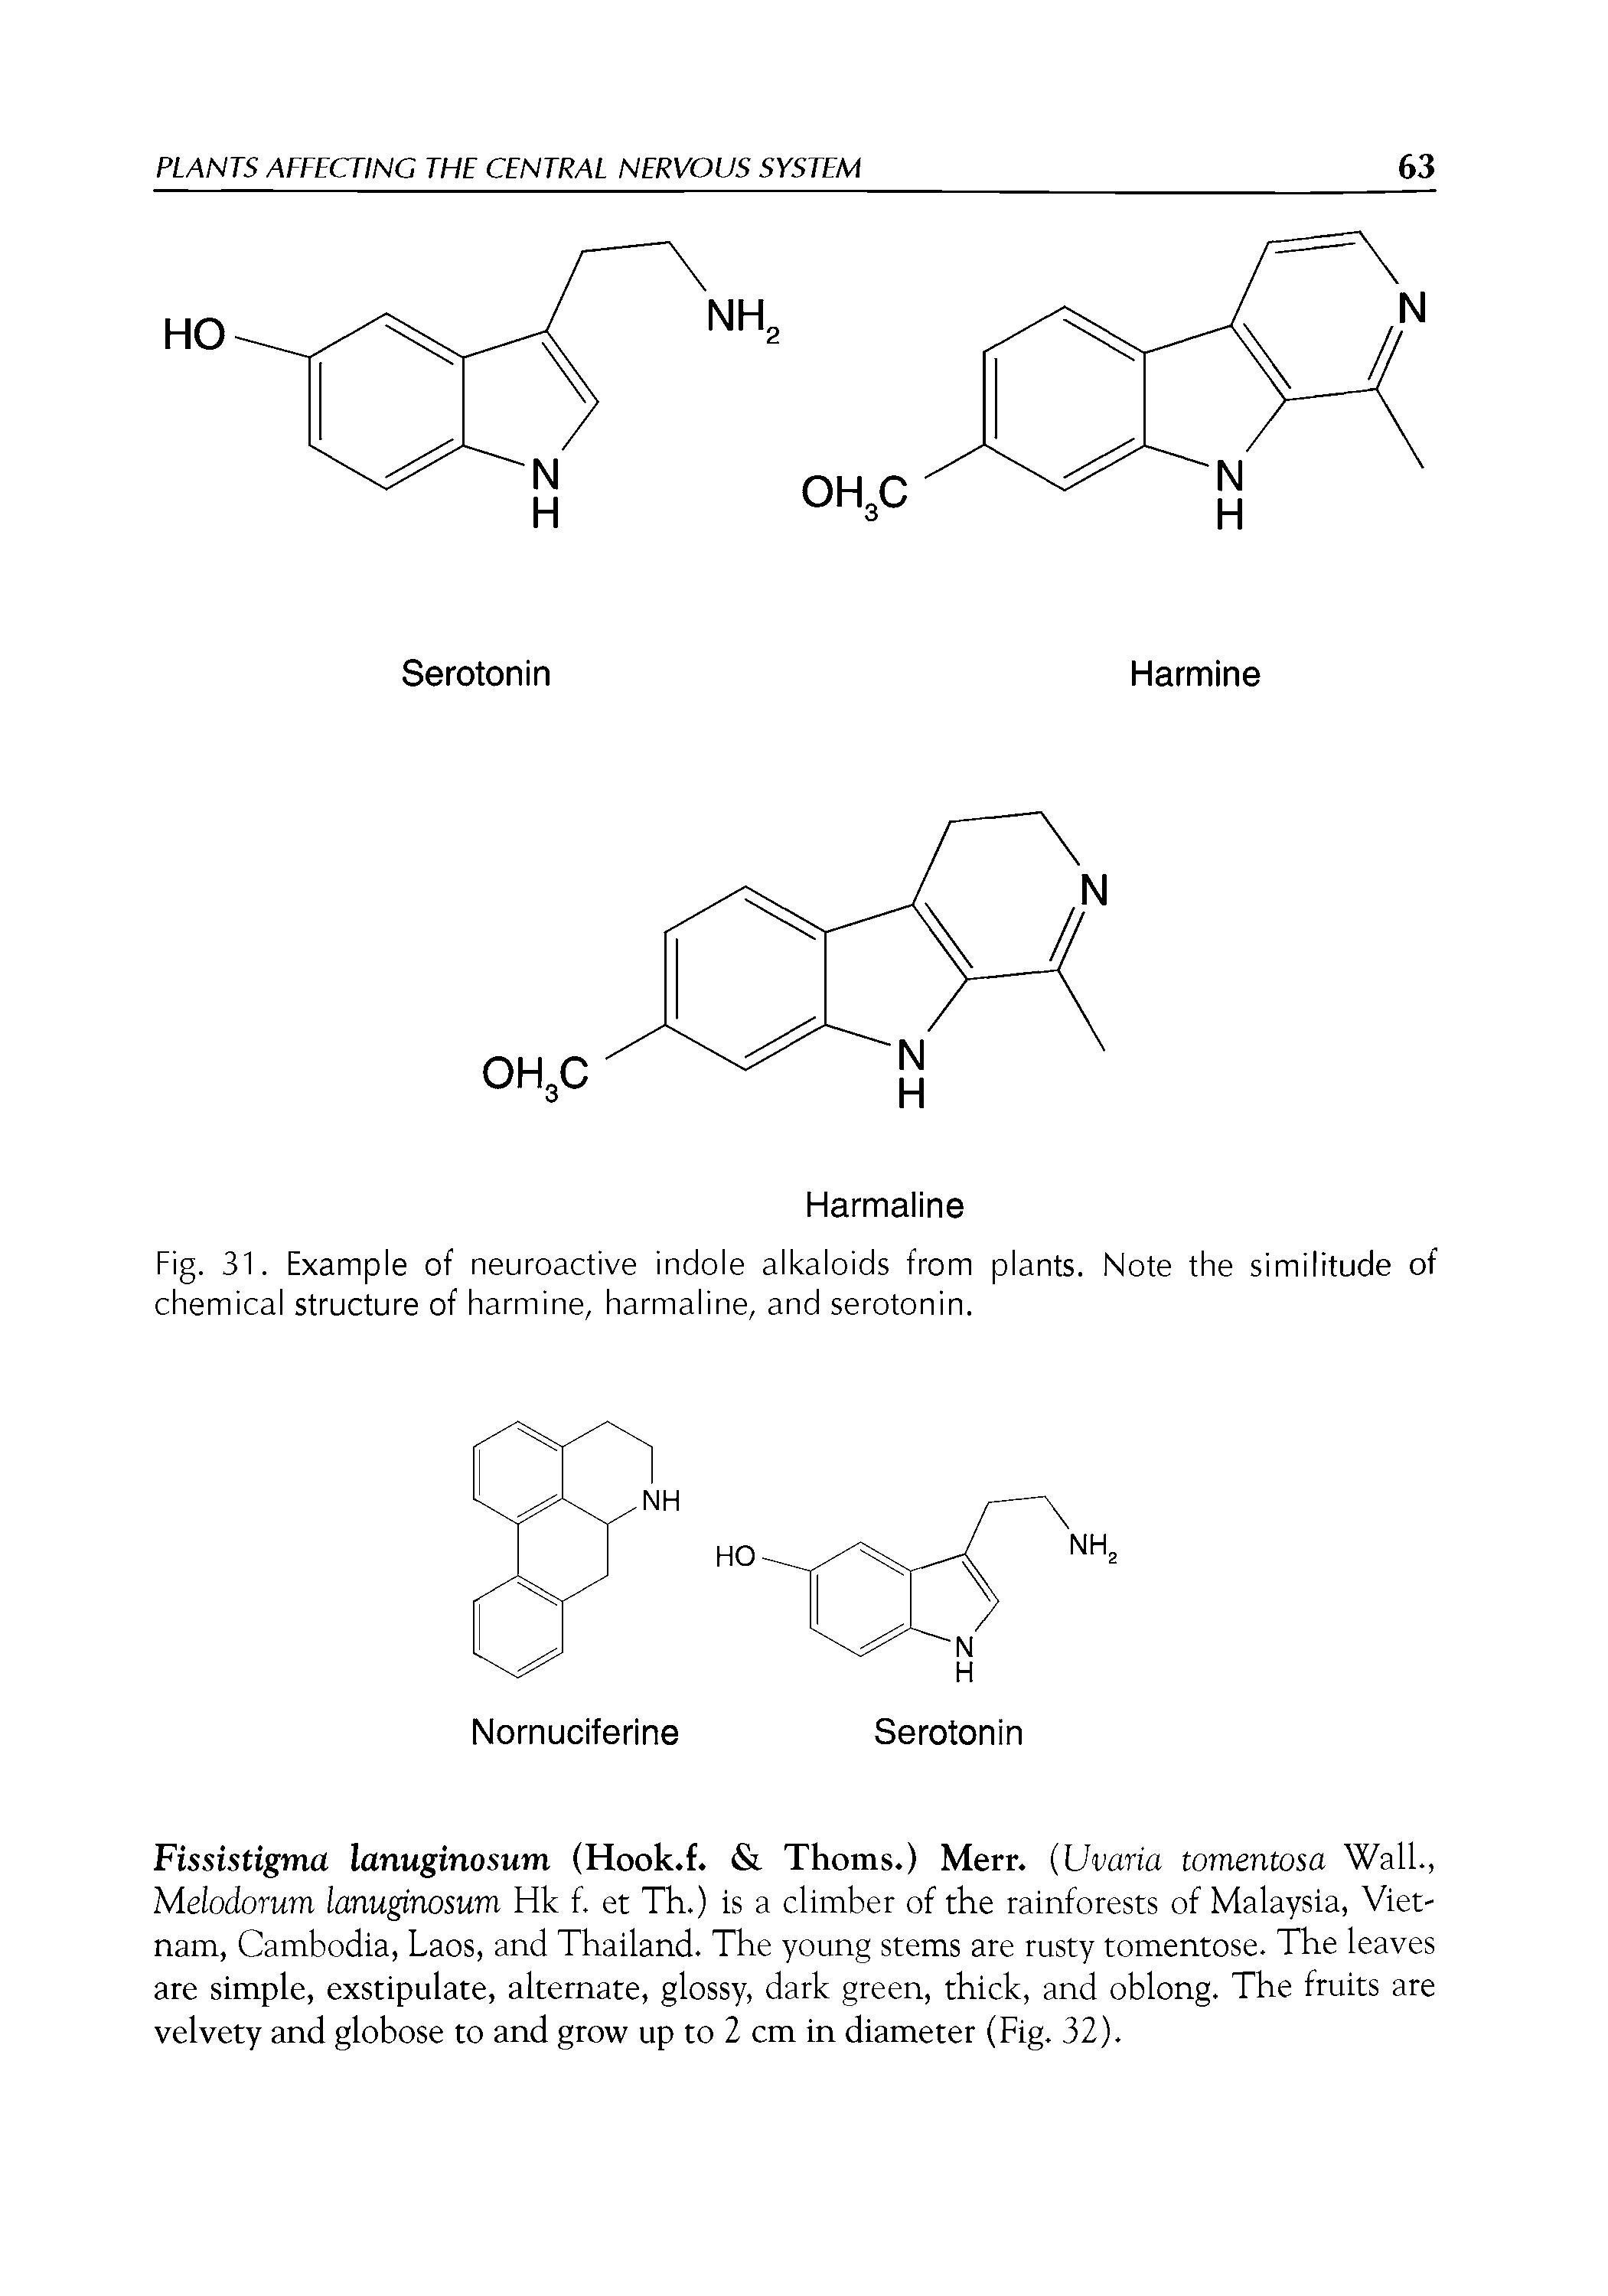 Fig. 31. Example of neuroactive indole alkaloids from plants. Note the similitude of chemical structure of harmine, harmaline, and serotonin.